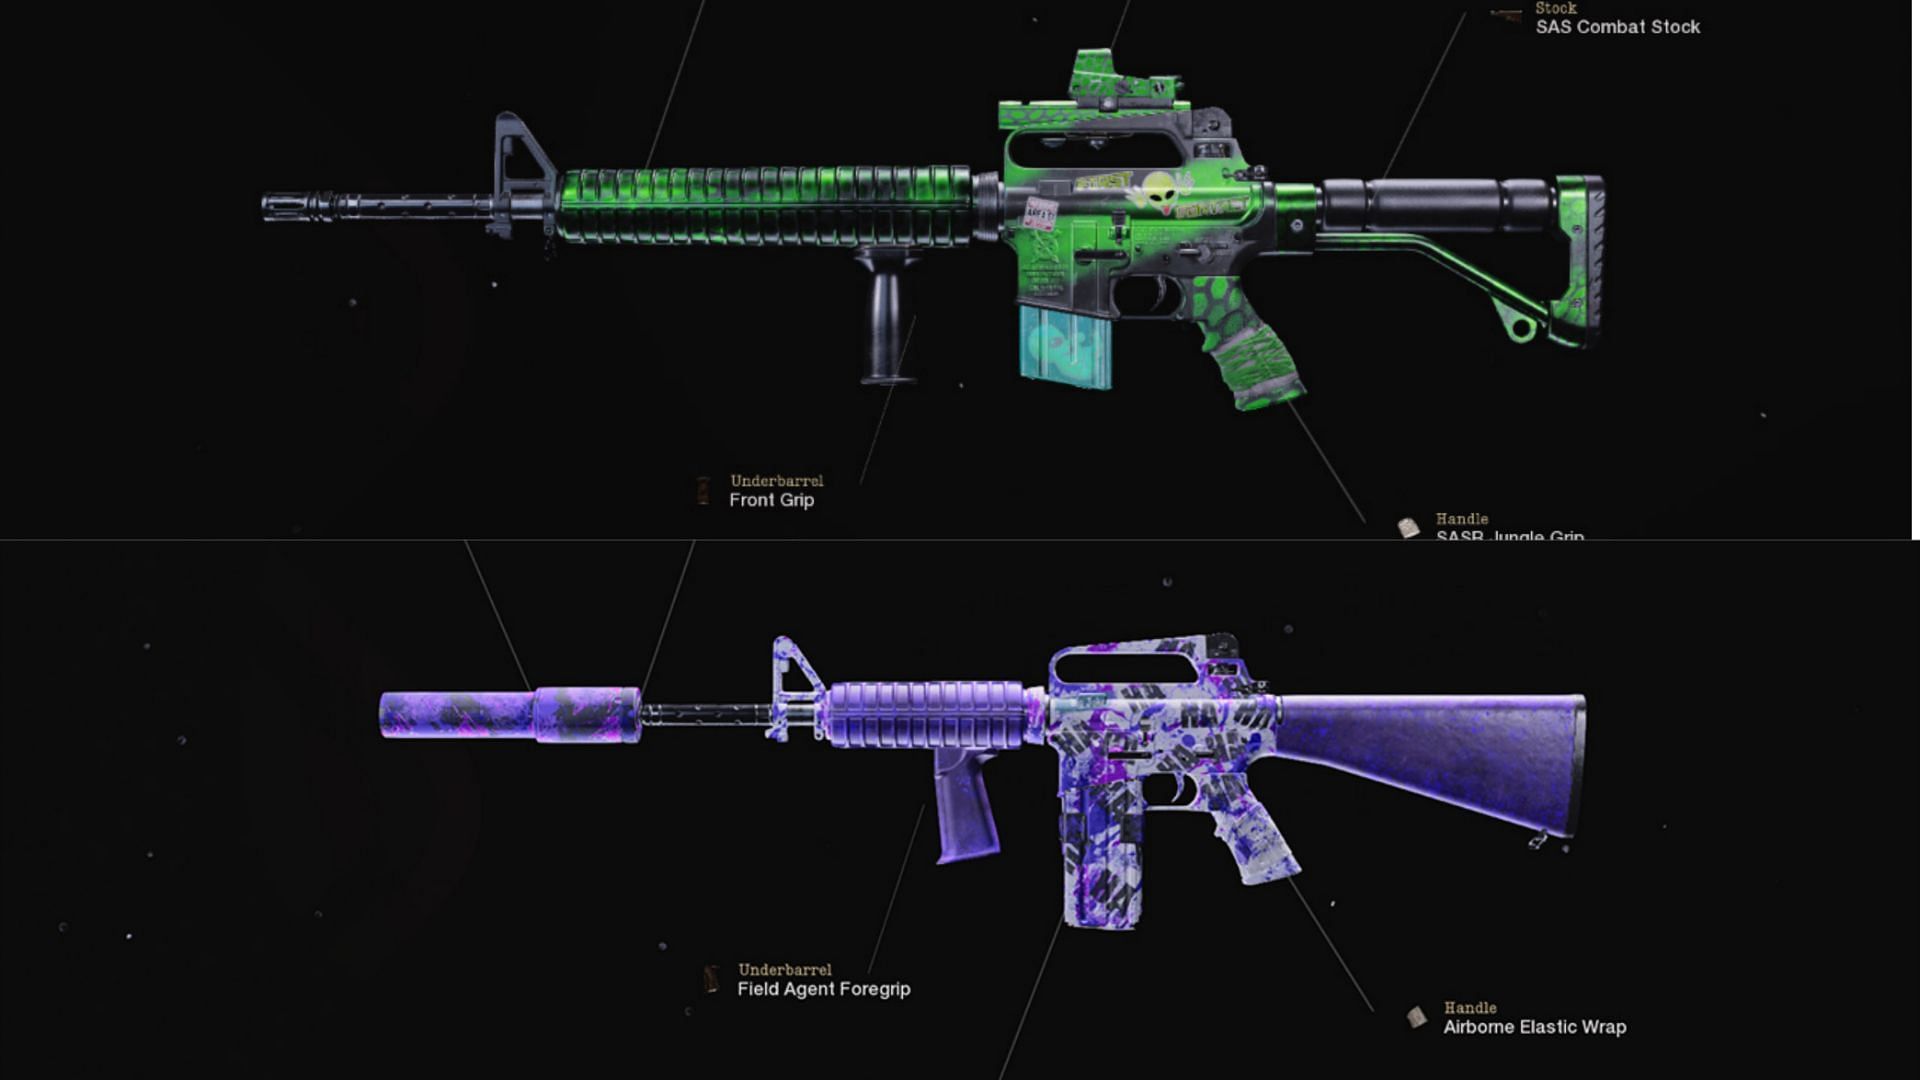 The Space Explorer and Funny Laugh blueprints for the M16 (Image via Activision)